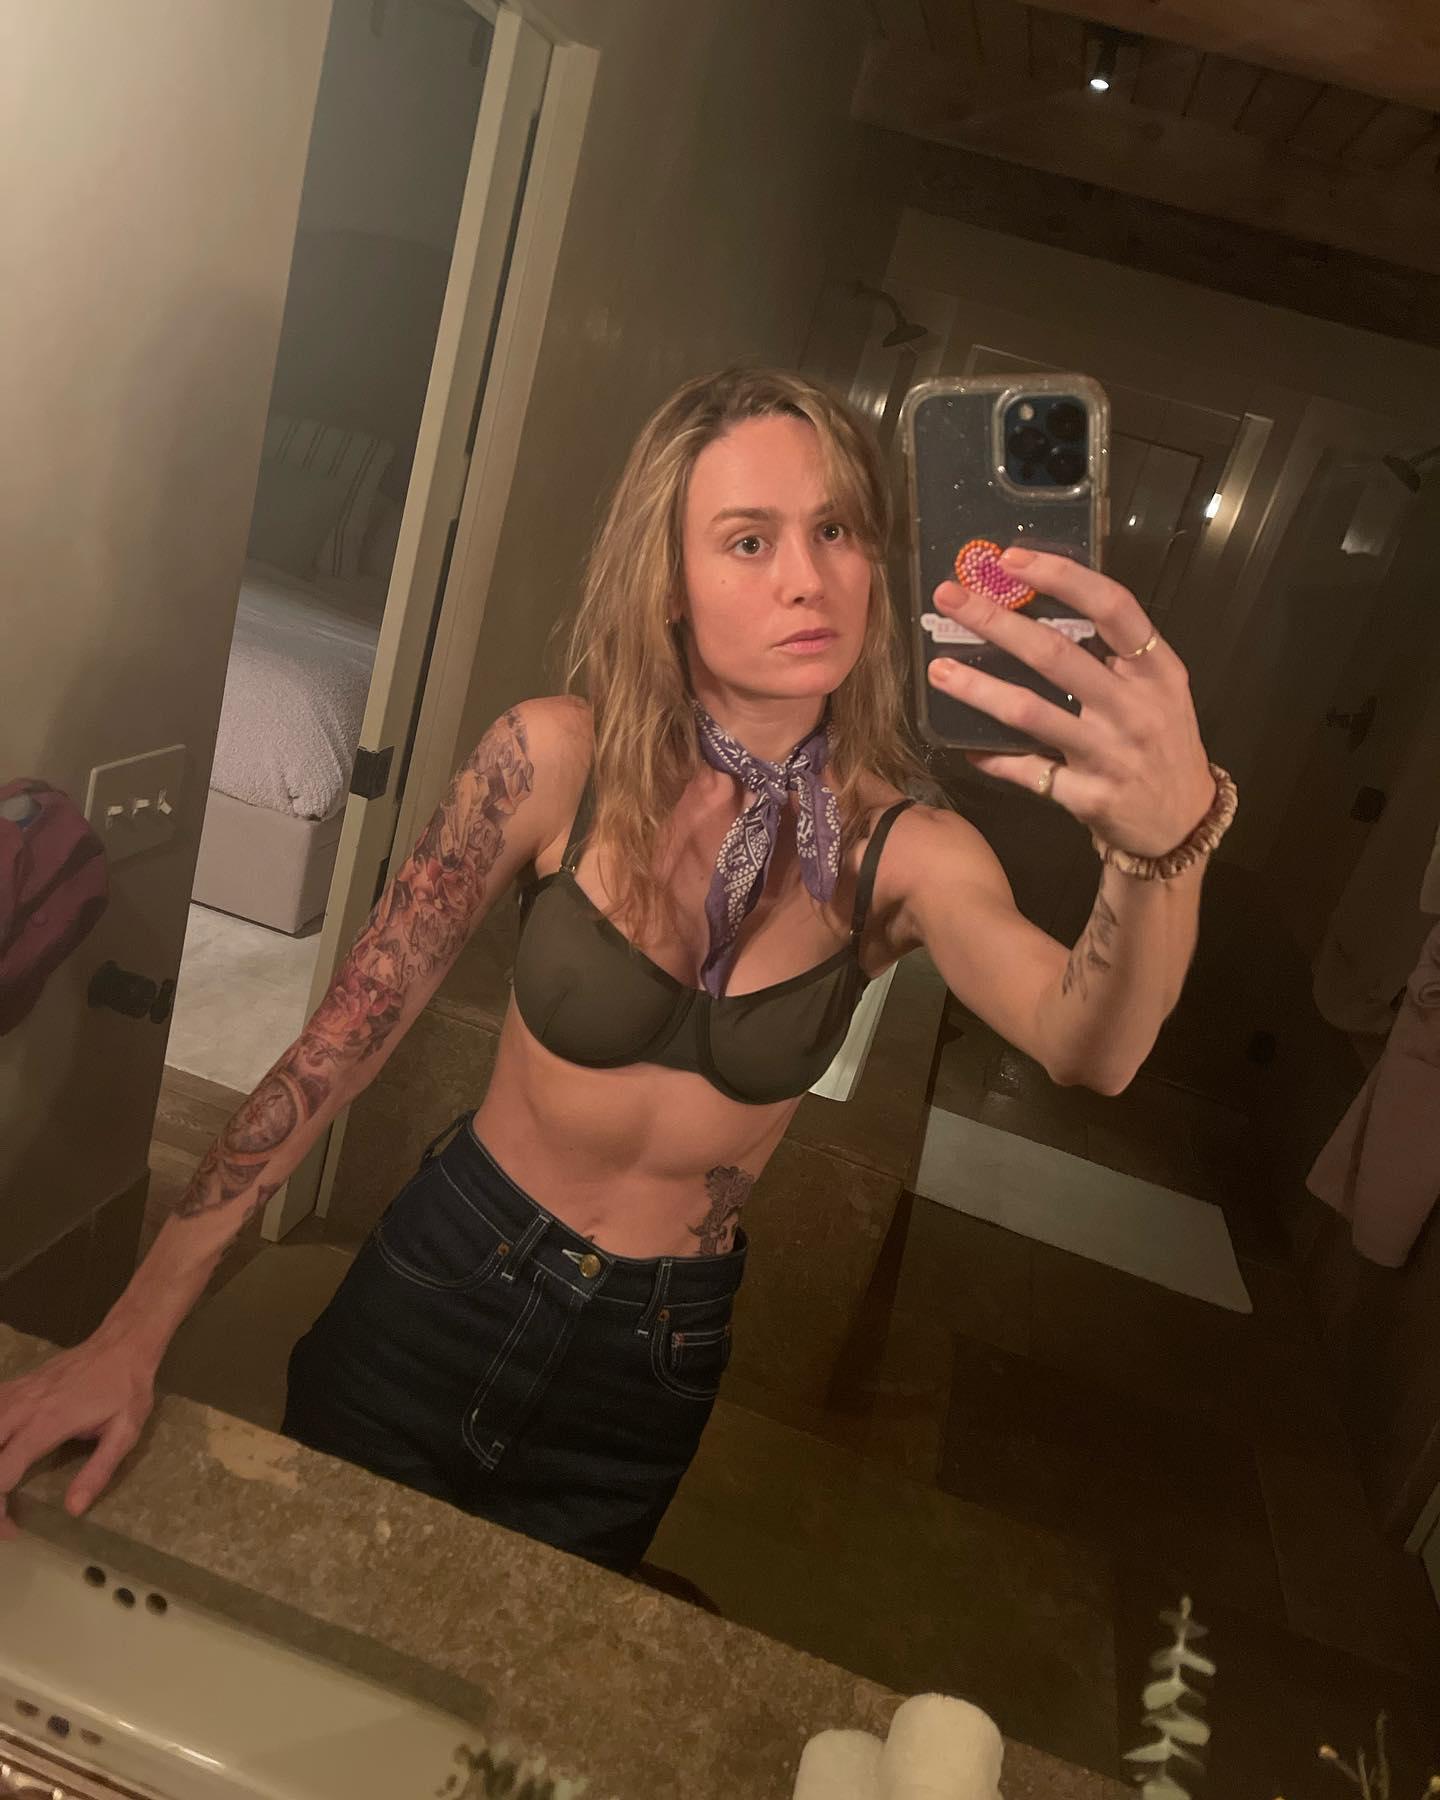 Brie Larson shows off an armful of tattoos